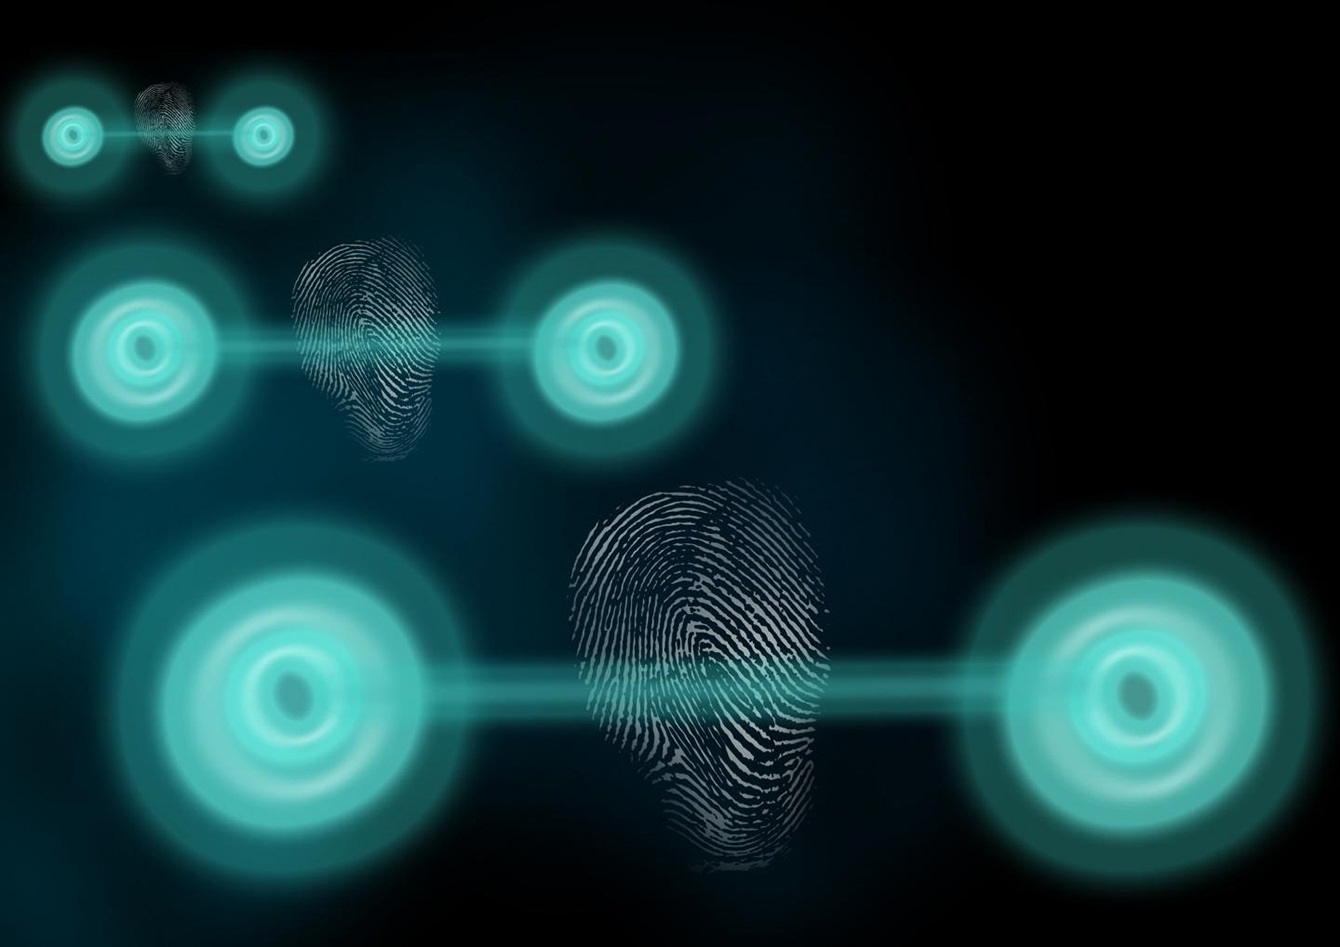 Measuring the fingerprint of quantum states could help to guard against errors and defective devices in quantum technologies.